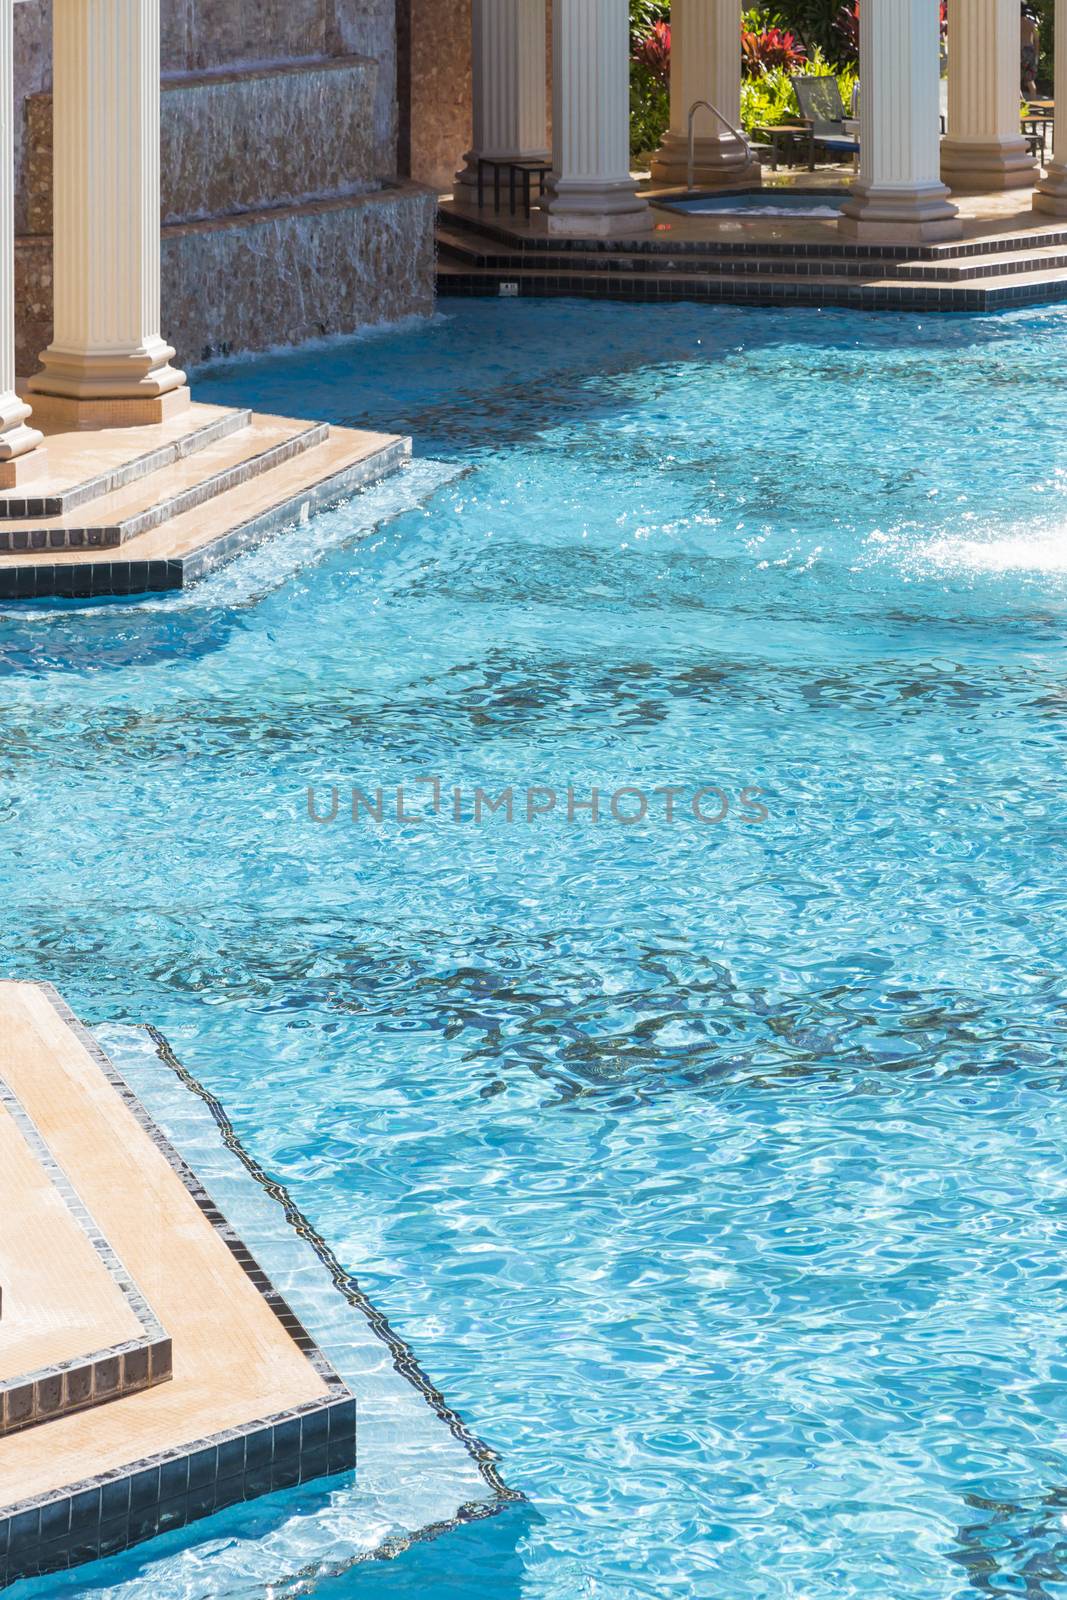 Exotic Luxury Swimming Pool Water, Hot Tub and Architecture Abstract.